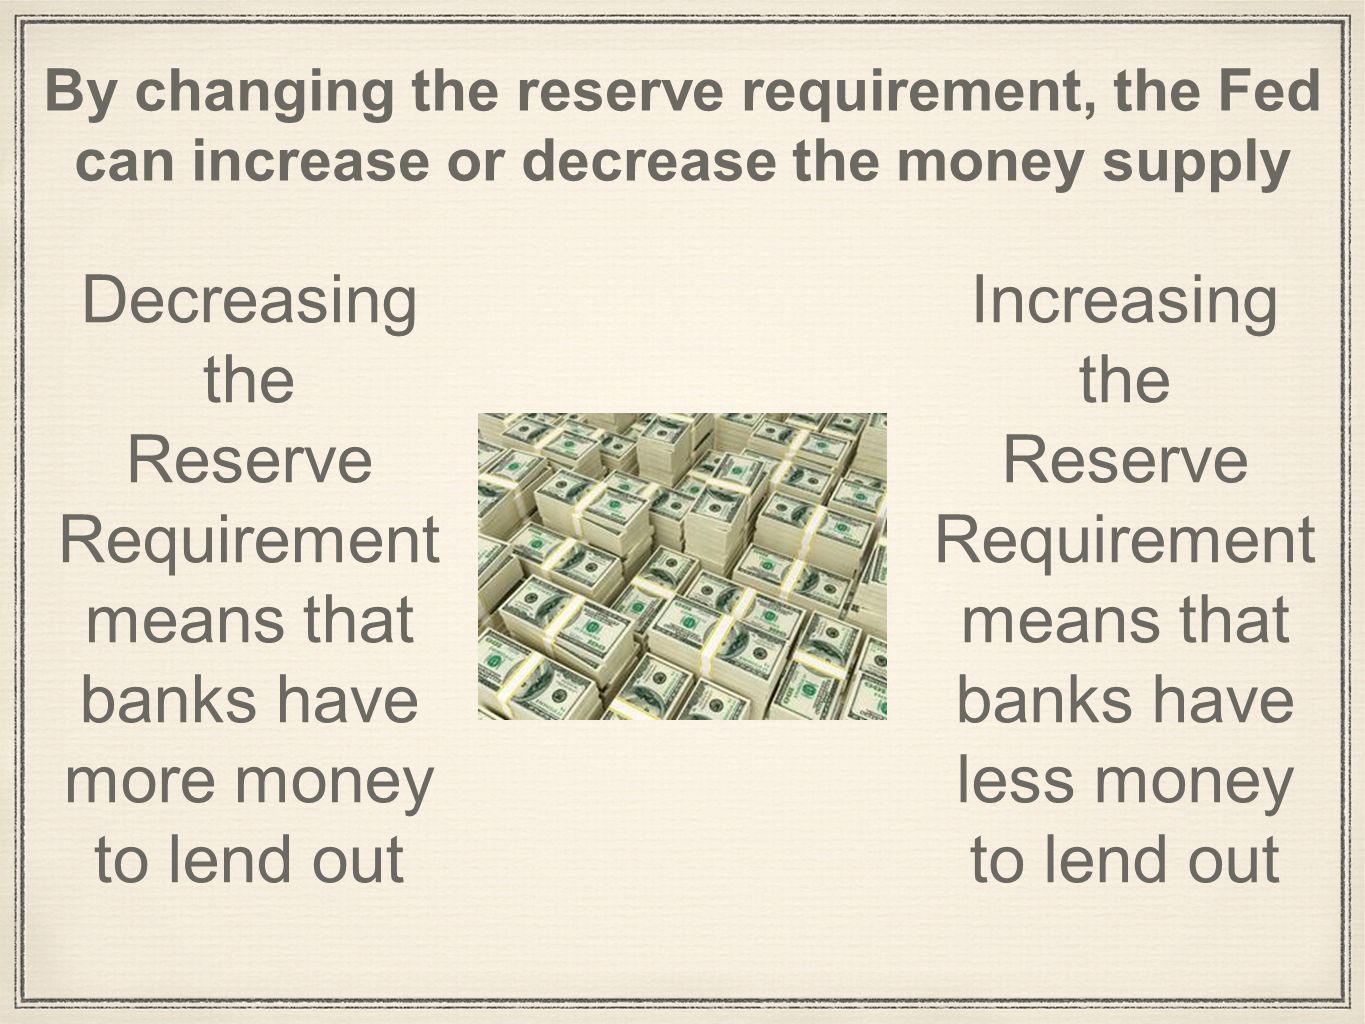 By changing the reserve requirement, the Fed can increase or decrease the money supply Decreasing the Reserve Requirement means that banks have more money to lend out Increasing the Reserve Requirement means that banks have less money to lend out